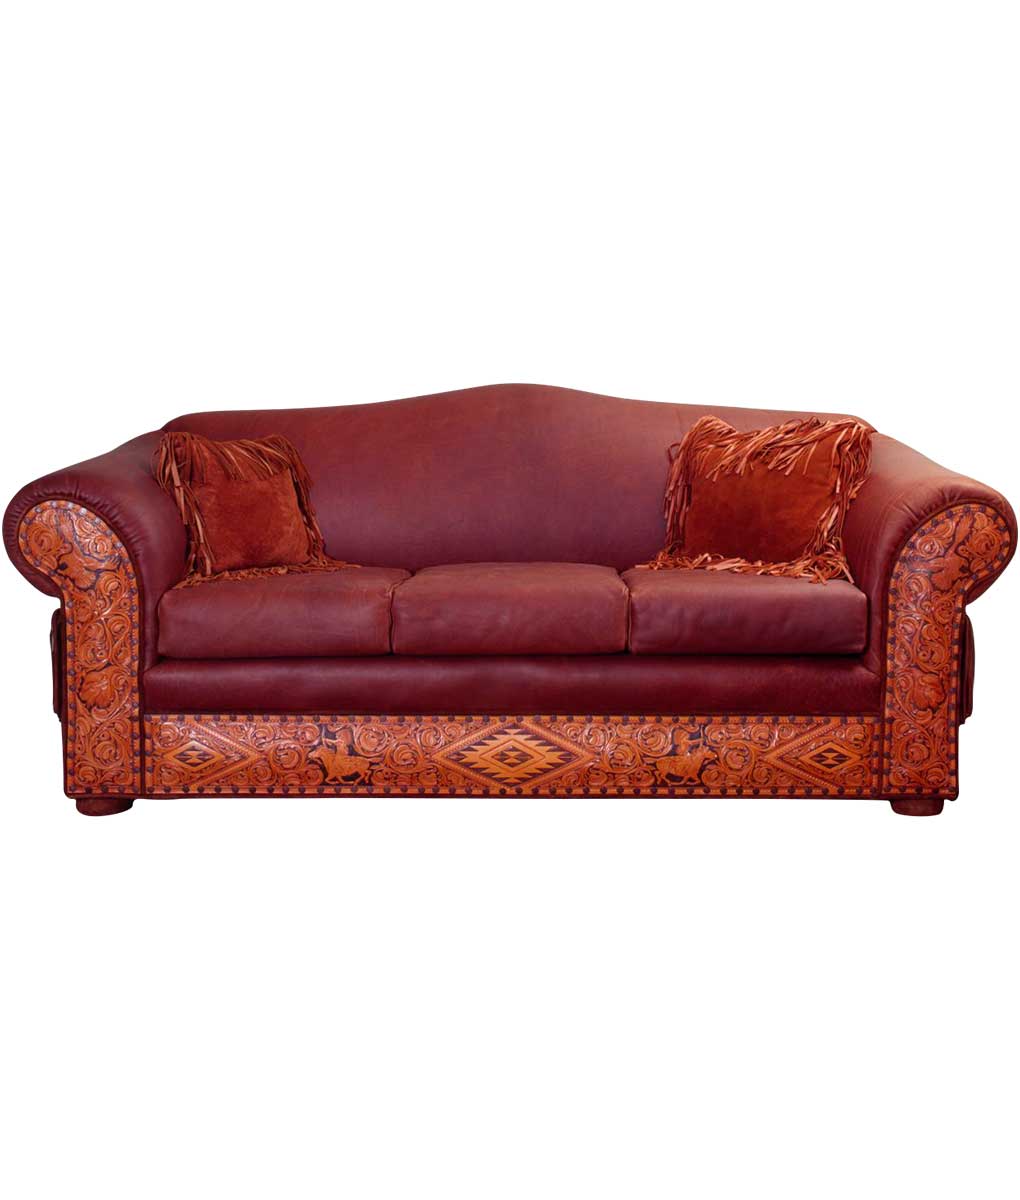 Hand Tooled Leather Sofa Elegant, Western Style Leather Couches